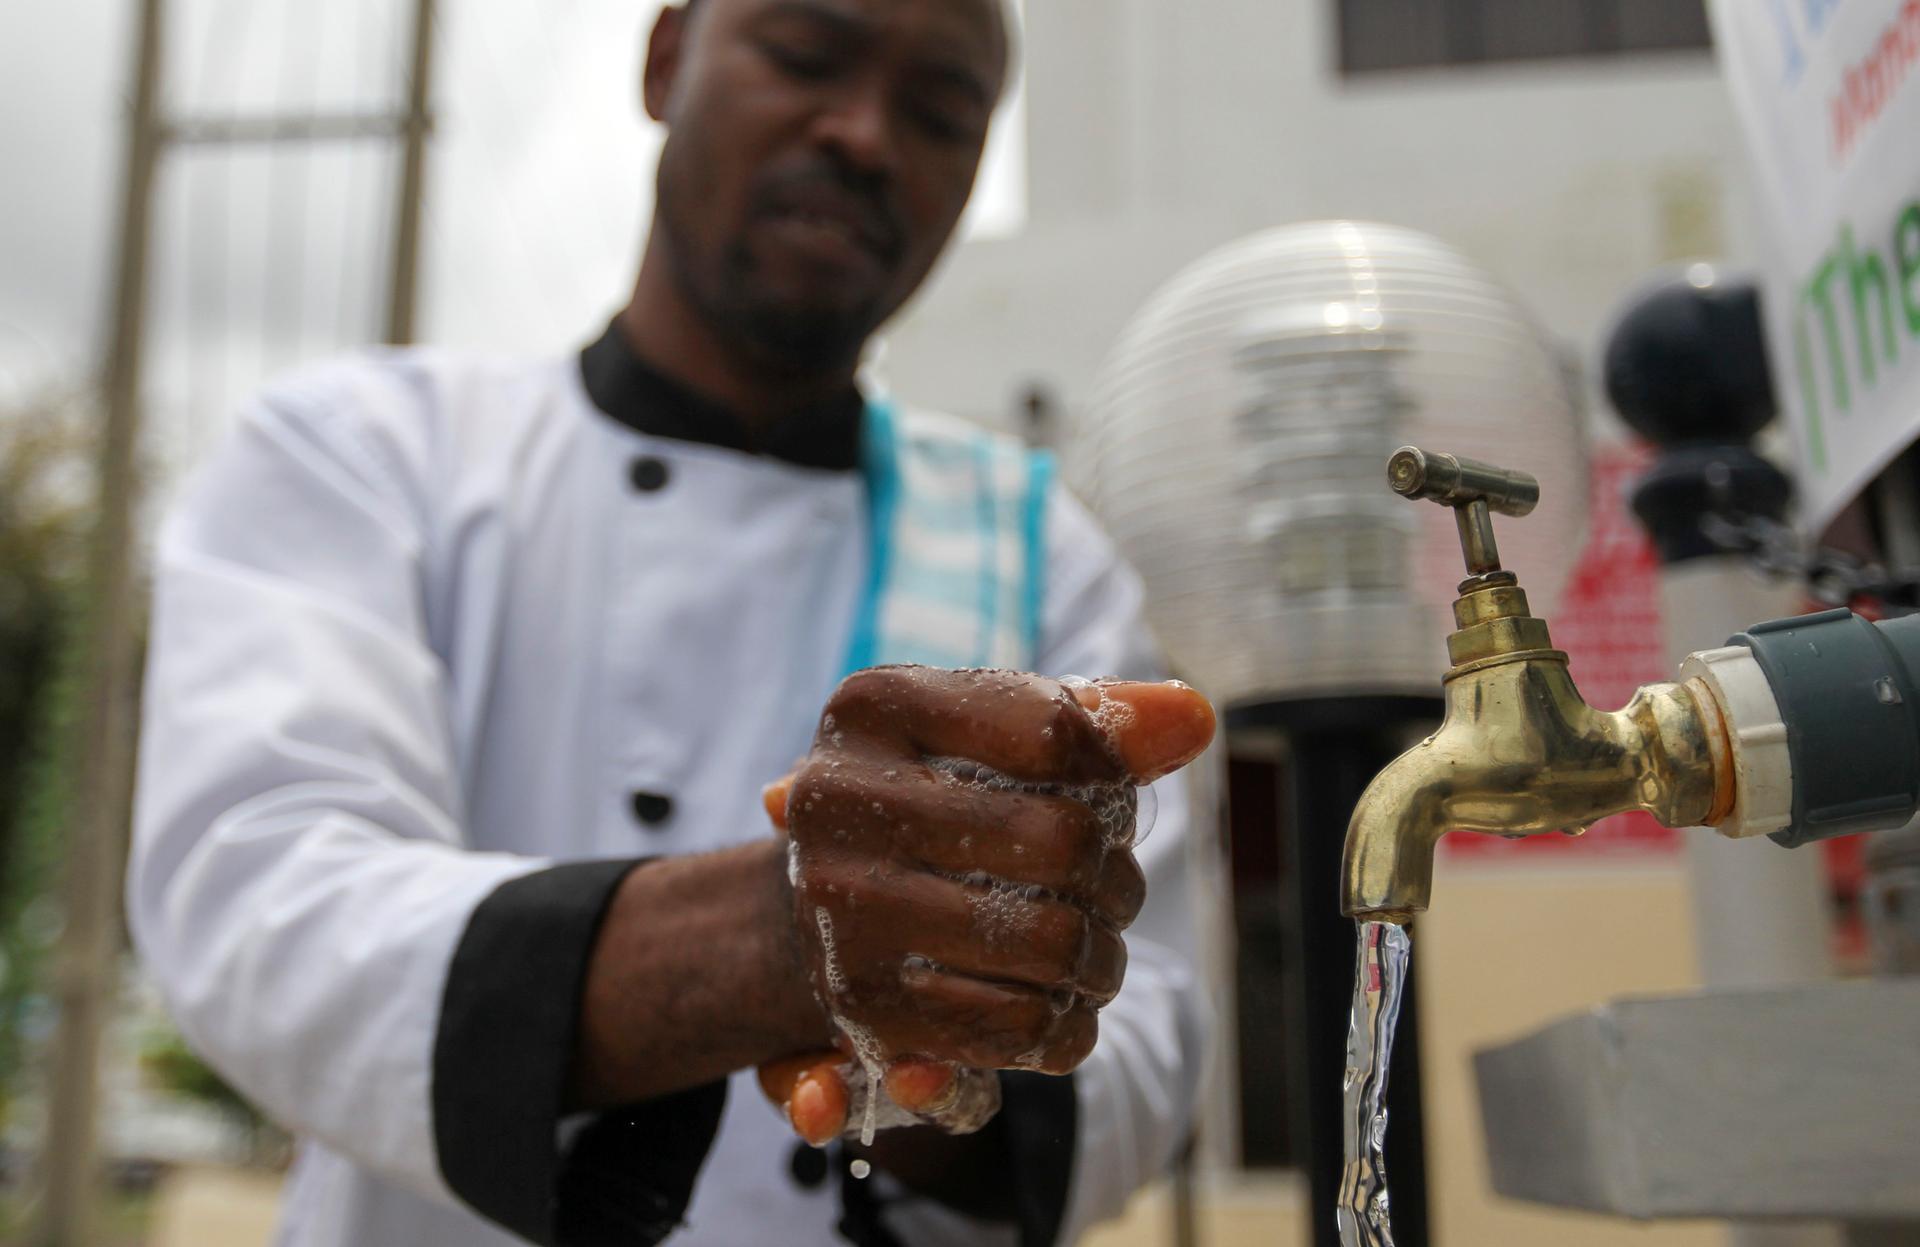 A man washes his hands at a facility outside the Green Pharmacy, Area 8, in Abuja, Nigeria on September 1, 2014.